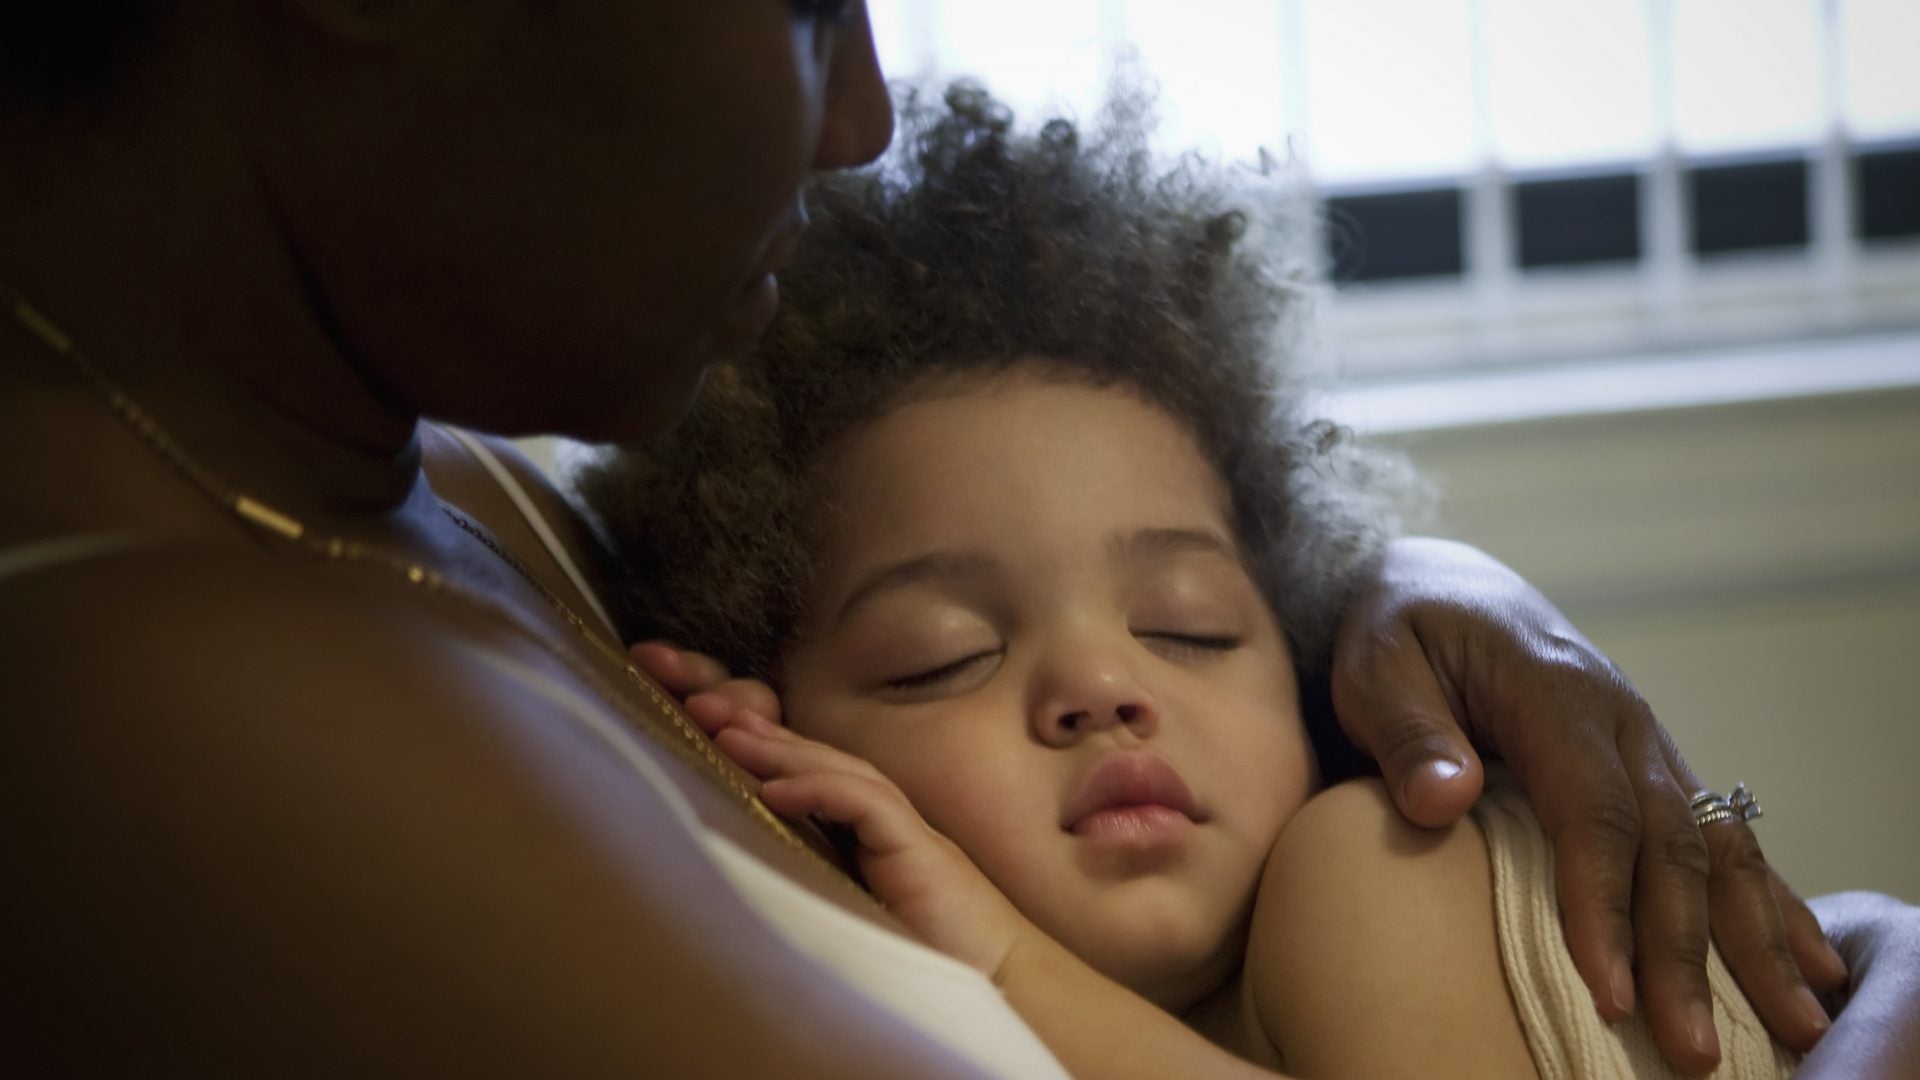 We Spoke With Black Mothers About How COVID-19 Is Affecting Their Families